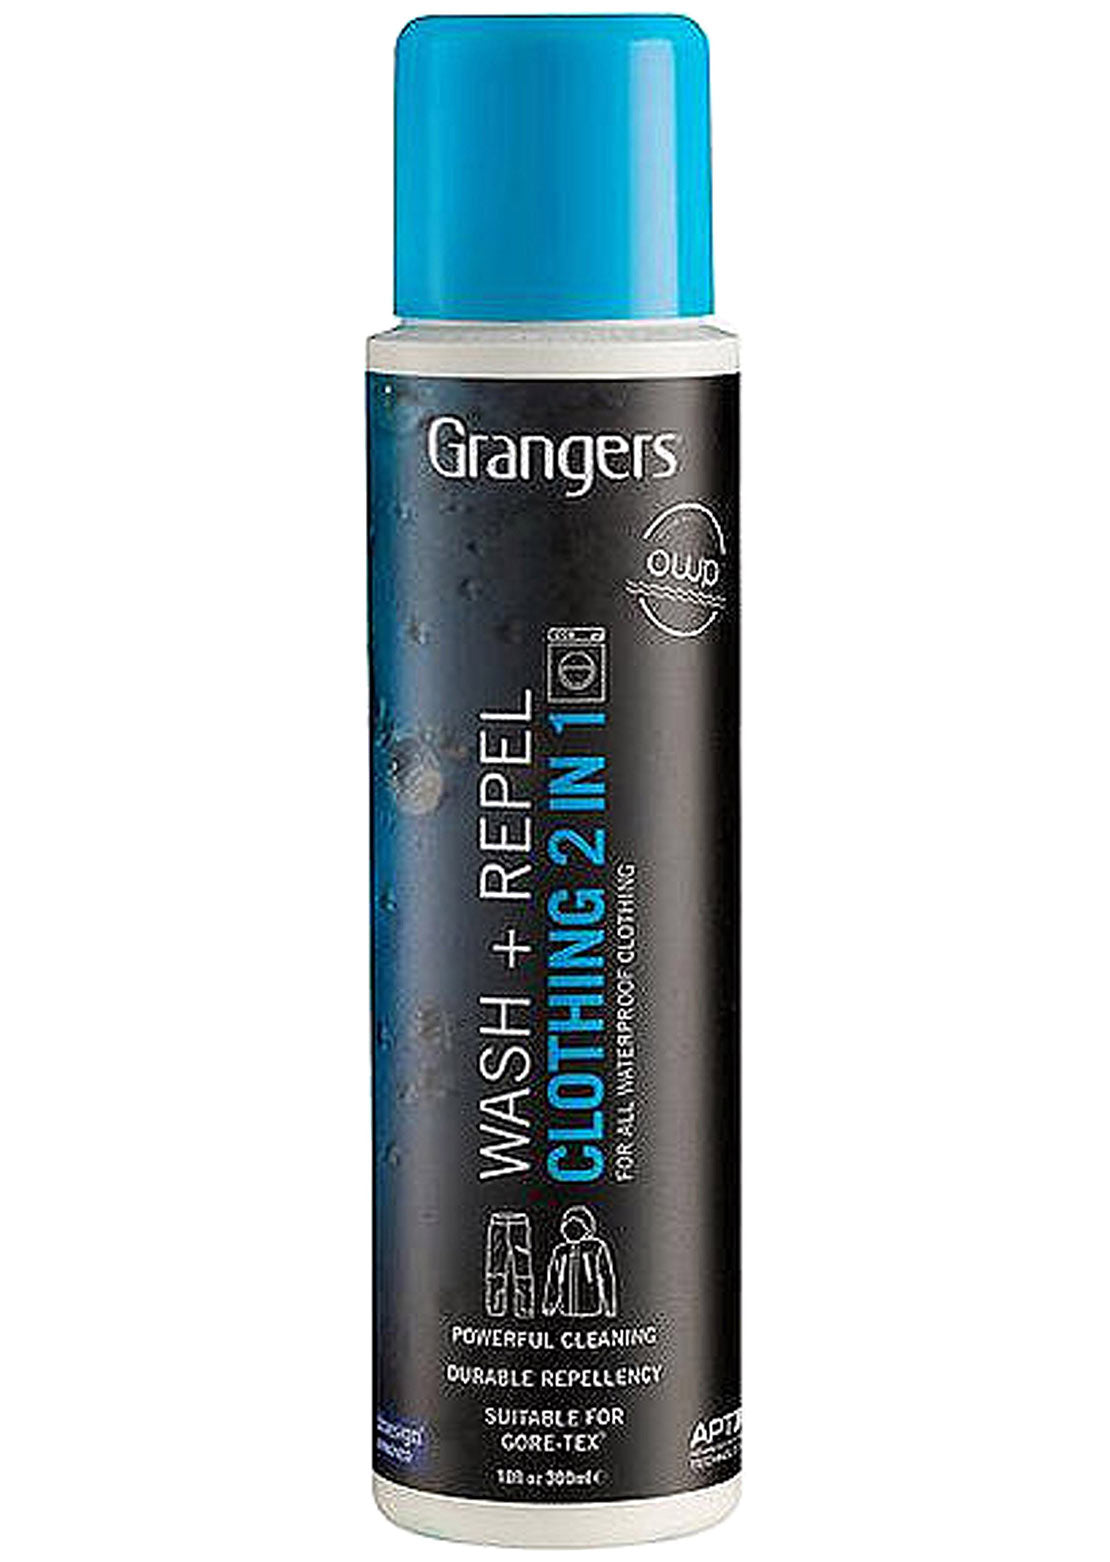 Grangers Wash and Repel Clothing 2 in 1